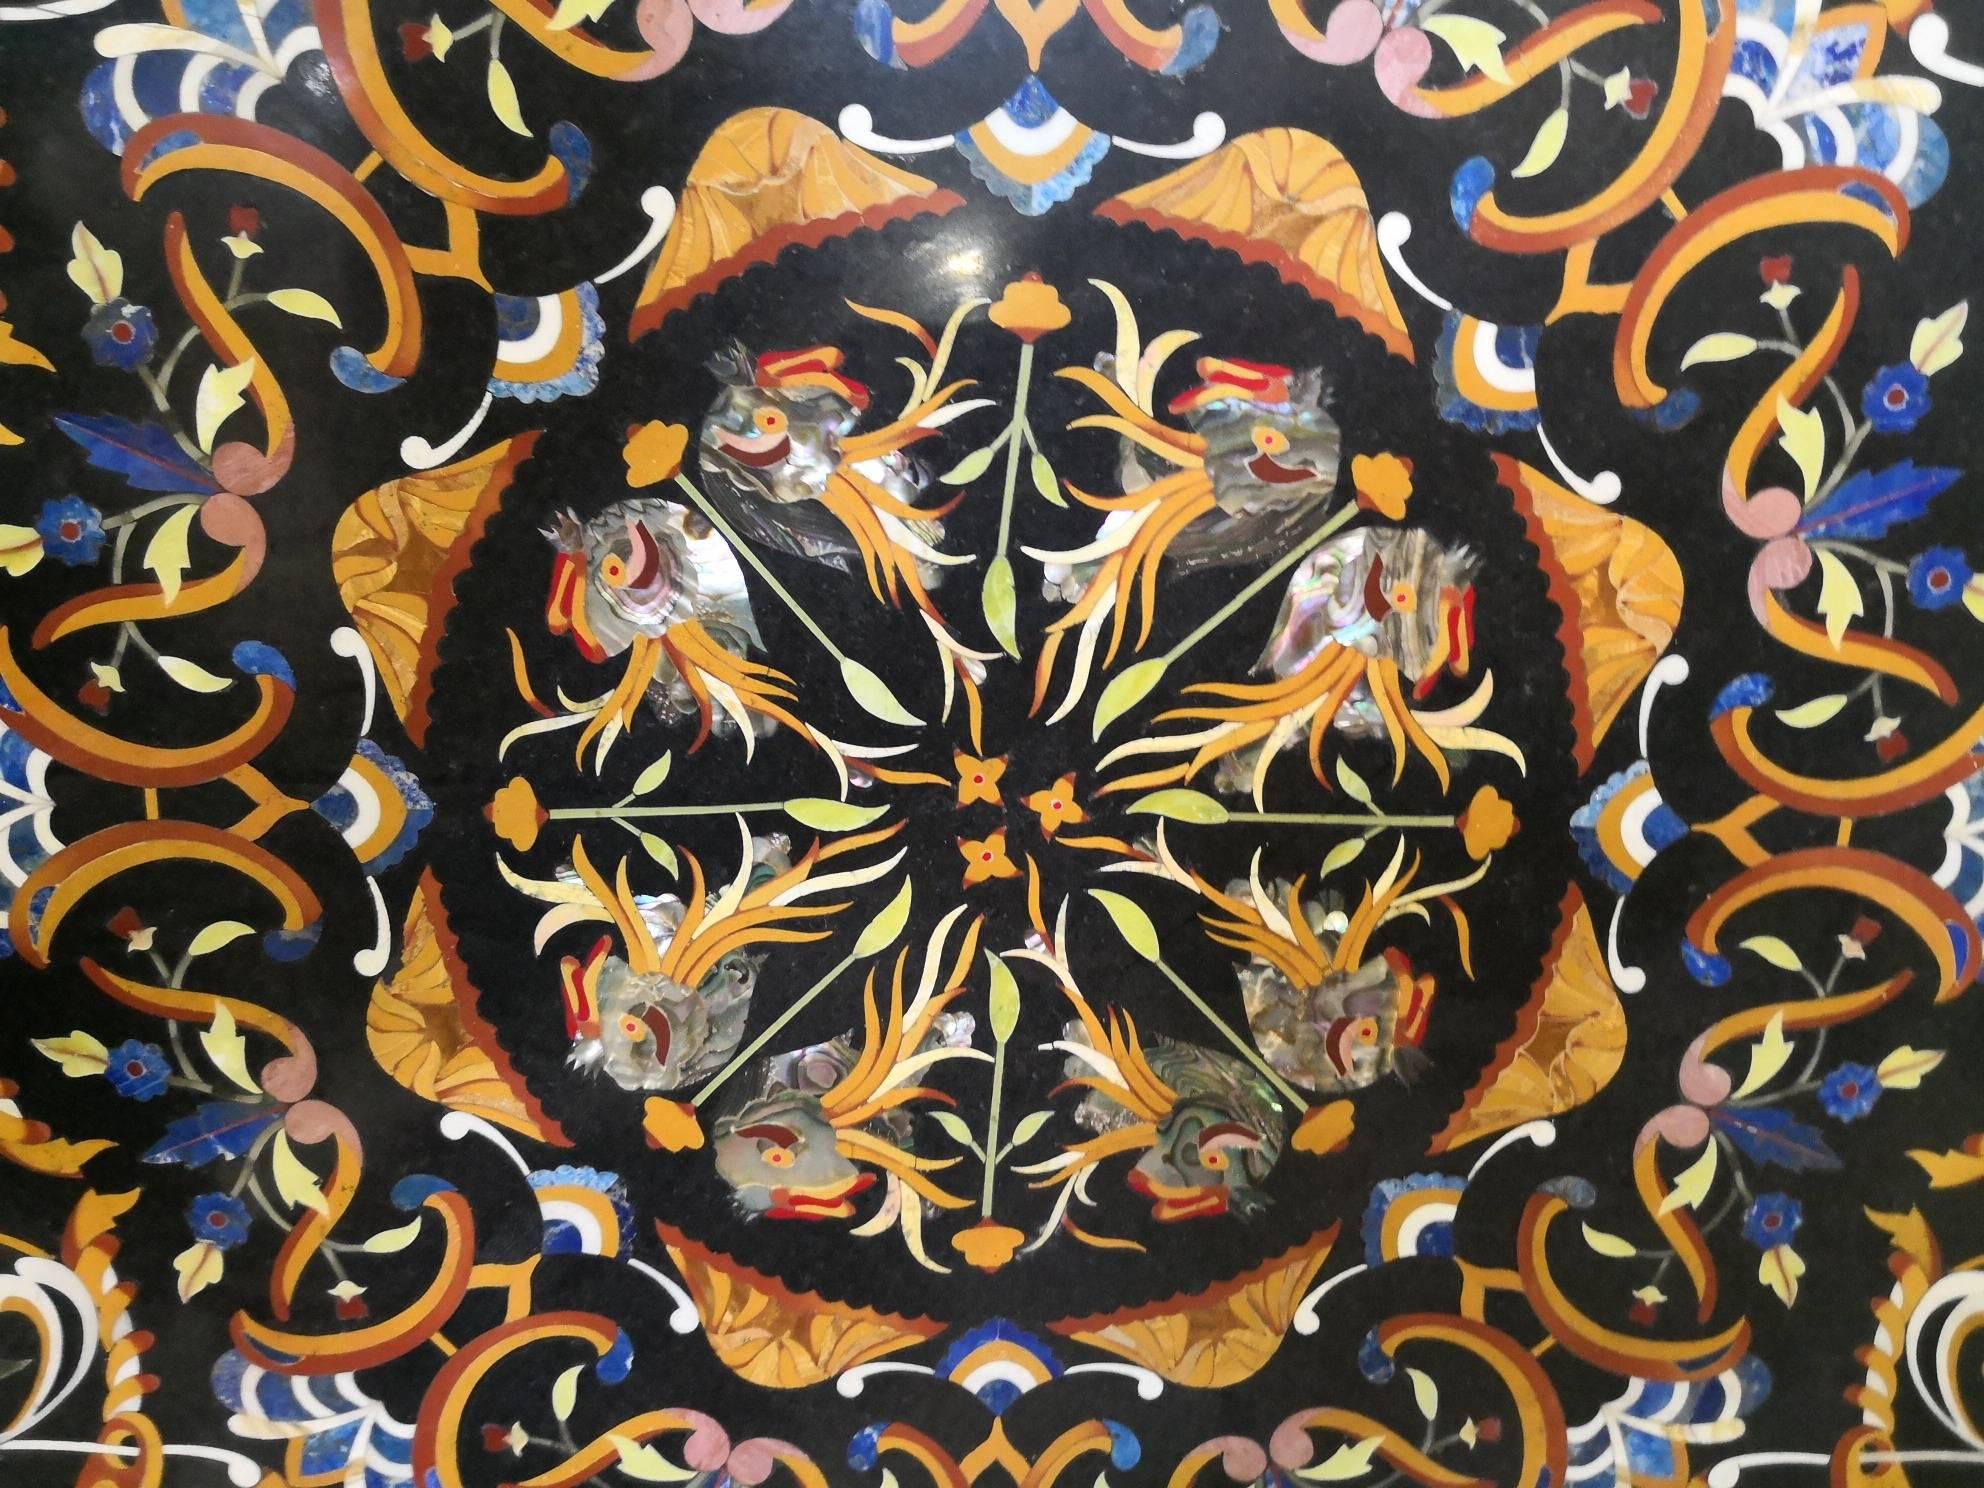 Handcrafted reproduction of Italian 1700s ornamental design on black Belgian marble table top. Vases with flowers, clam shells, fishes and a myriad of elements are confirmed by the clever use of Pietre Dure, semiprecious hard-stones: green